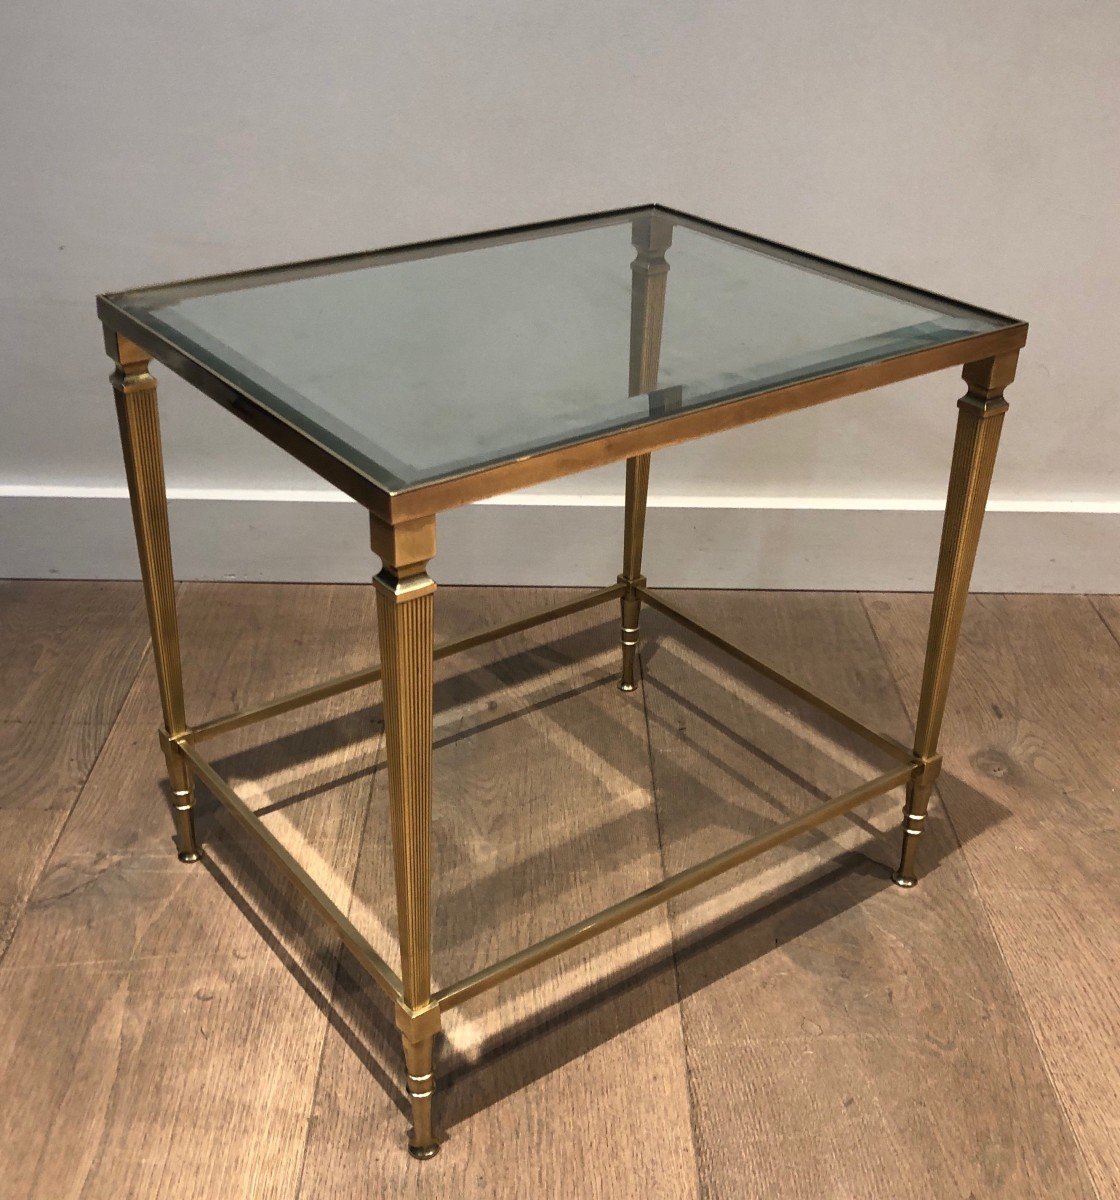 Neoclassical Style Brass Side Table With Fluted Legs. French Work By Maison Jansen. Circa 1940